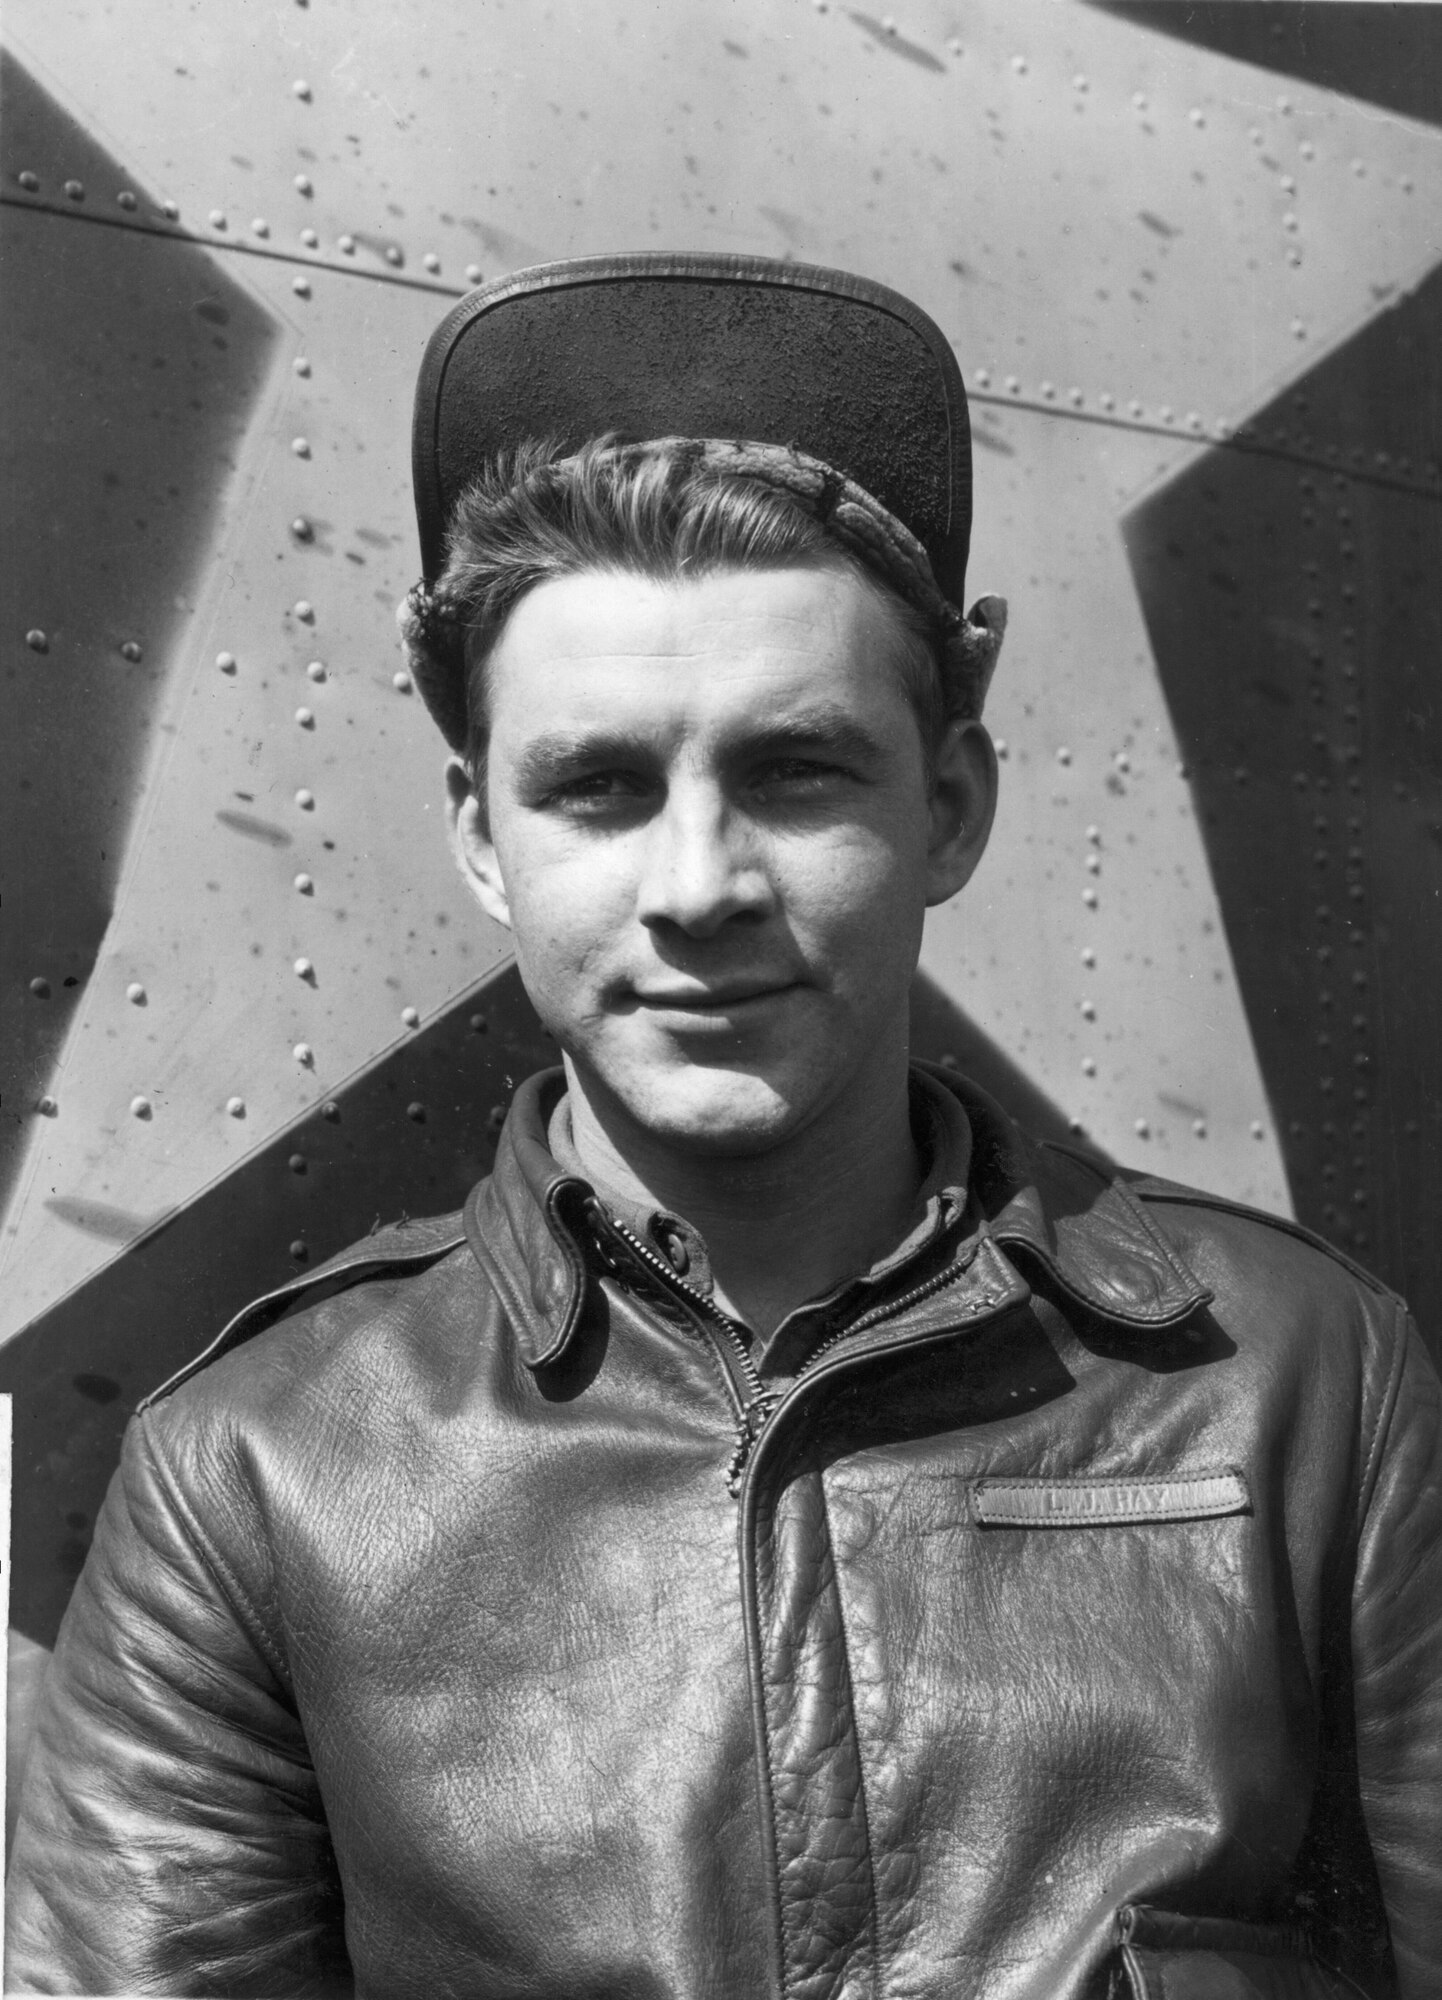 Tech. Sgt. Leonard Ray, a member of the Maryland National Guard, was mobilized just prior to World War II. He is seen here shortly before his death in 1944.